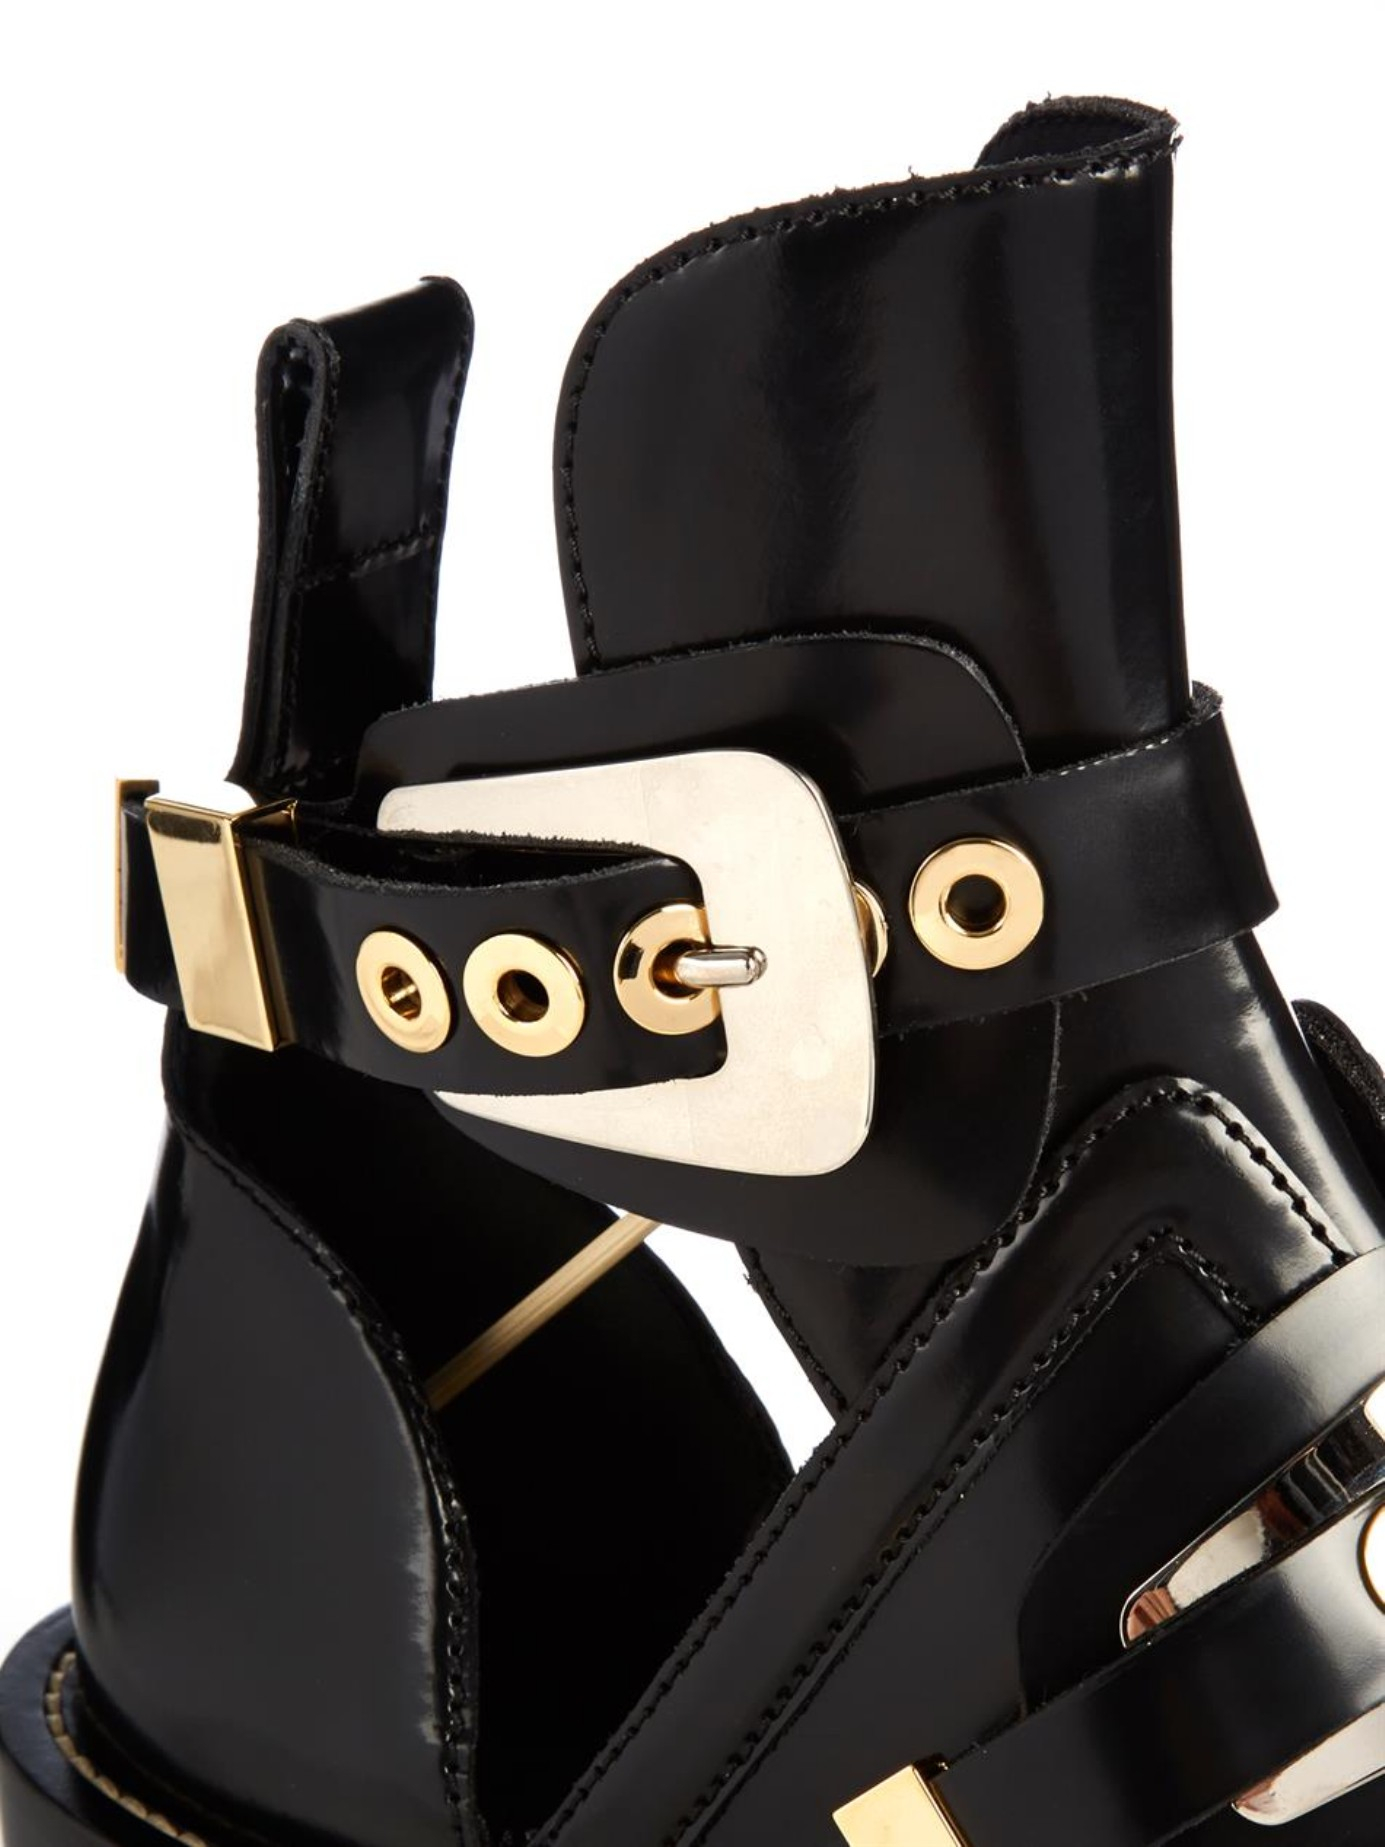 Balenciaga Ceinture Cut-out Leather Ankle Boots in Black | Lyst